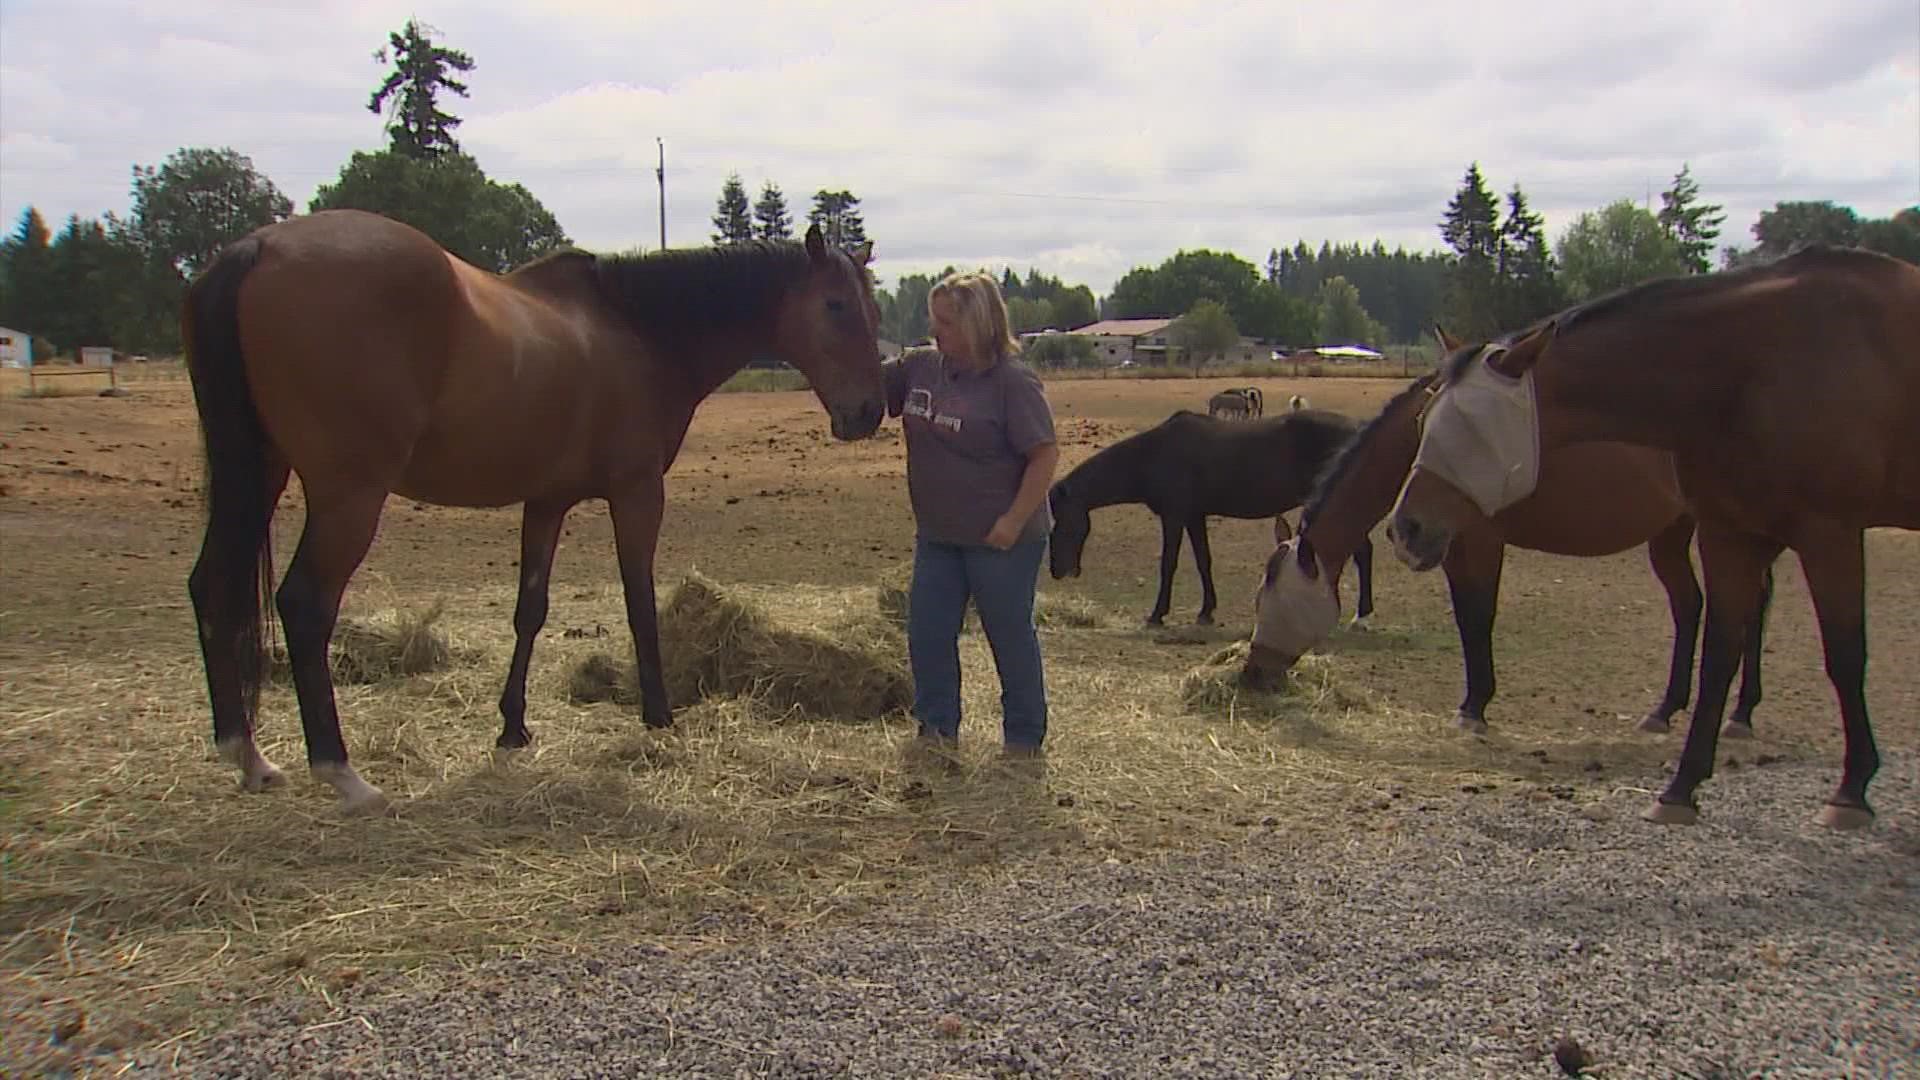 The owners of Black Dawg Farm and Sanctuary have heard hay prices could double when their current supply runs out in November, so they're trying to prepare now.